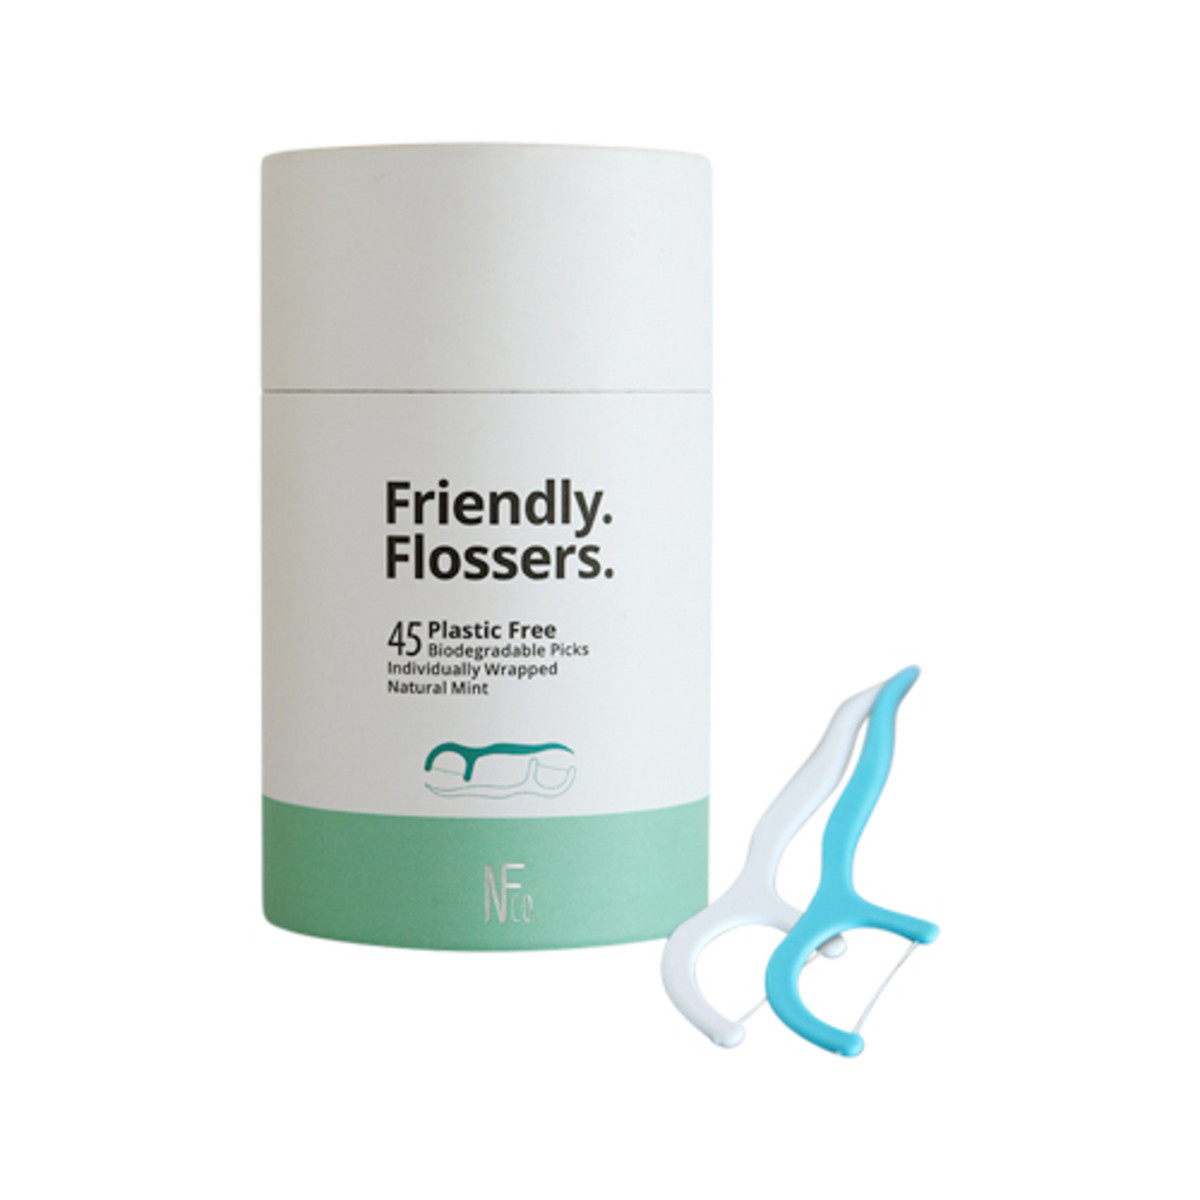 THE NATURAL FAMILY CO. - Friendly Flossers. Biodegradable picks Natural Mint